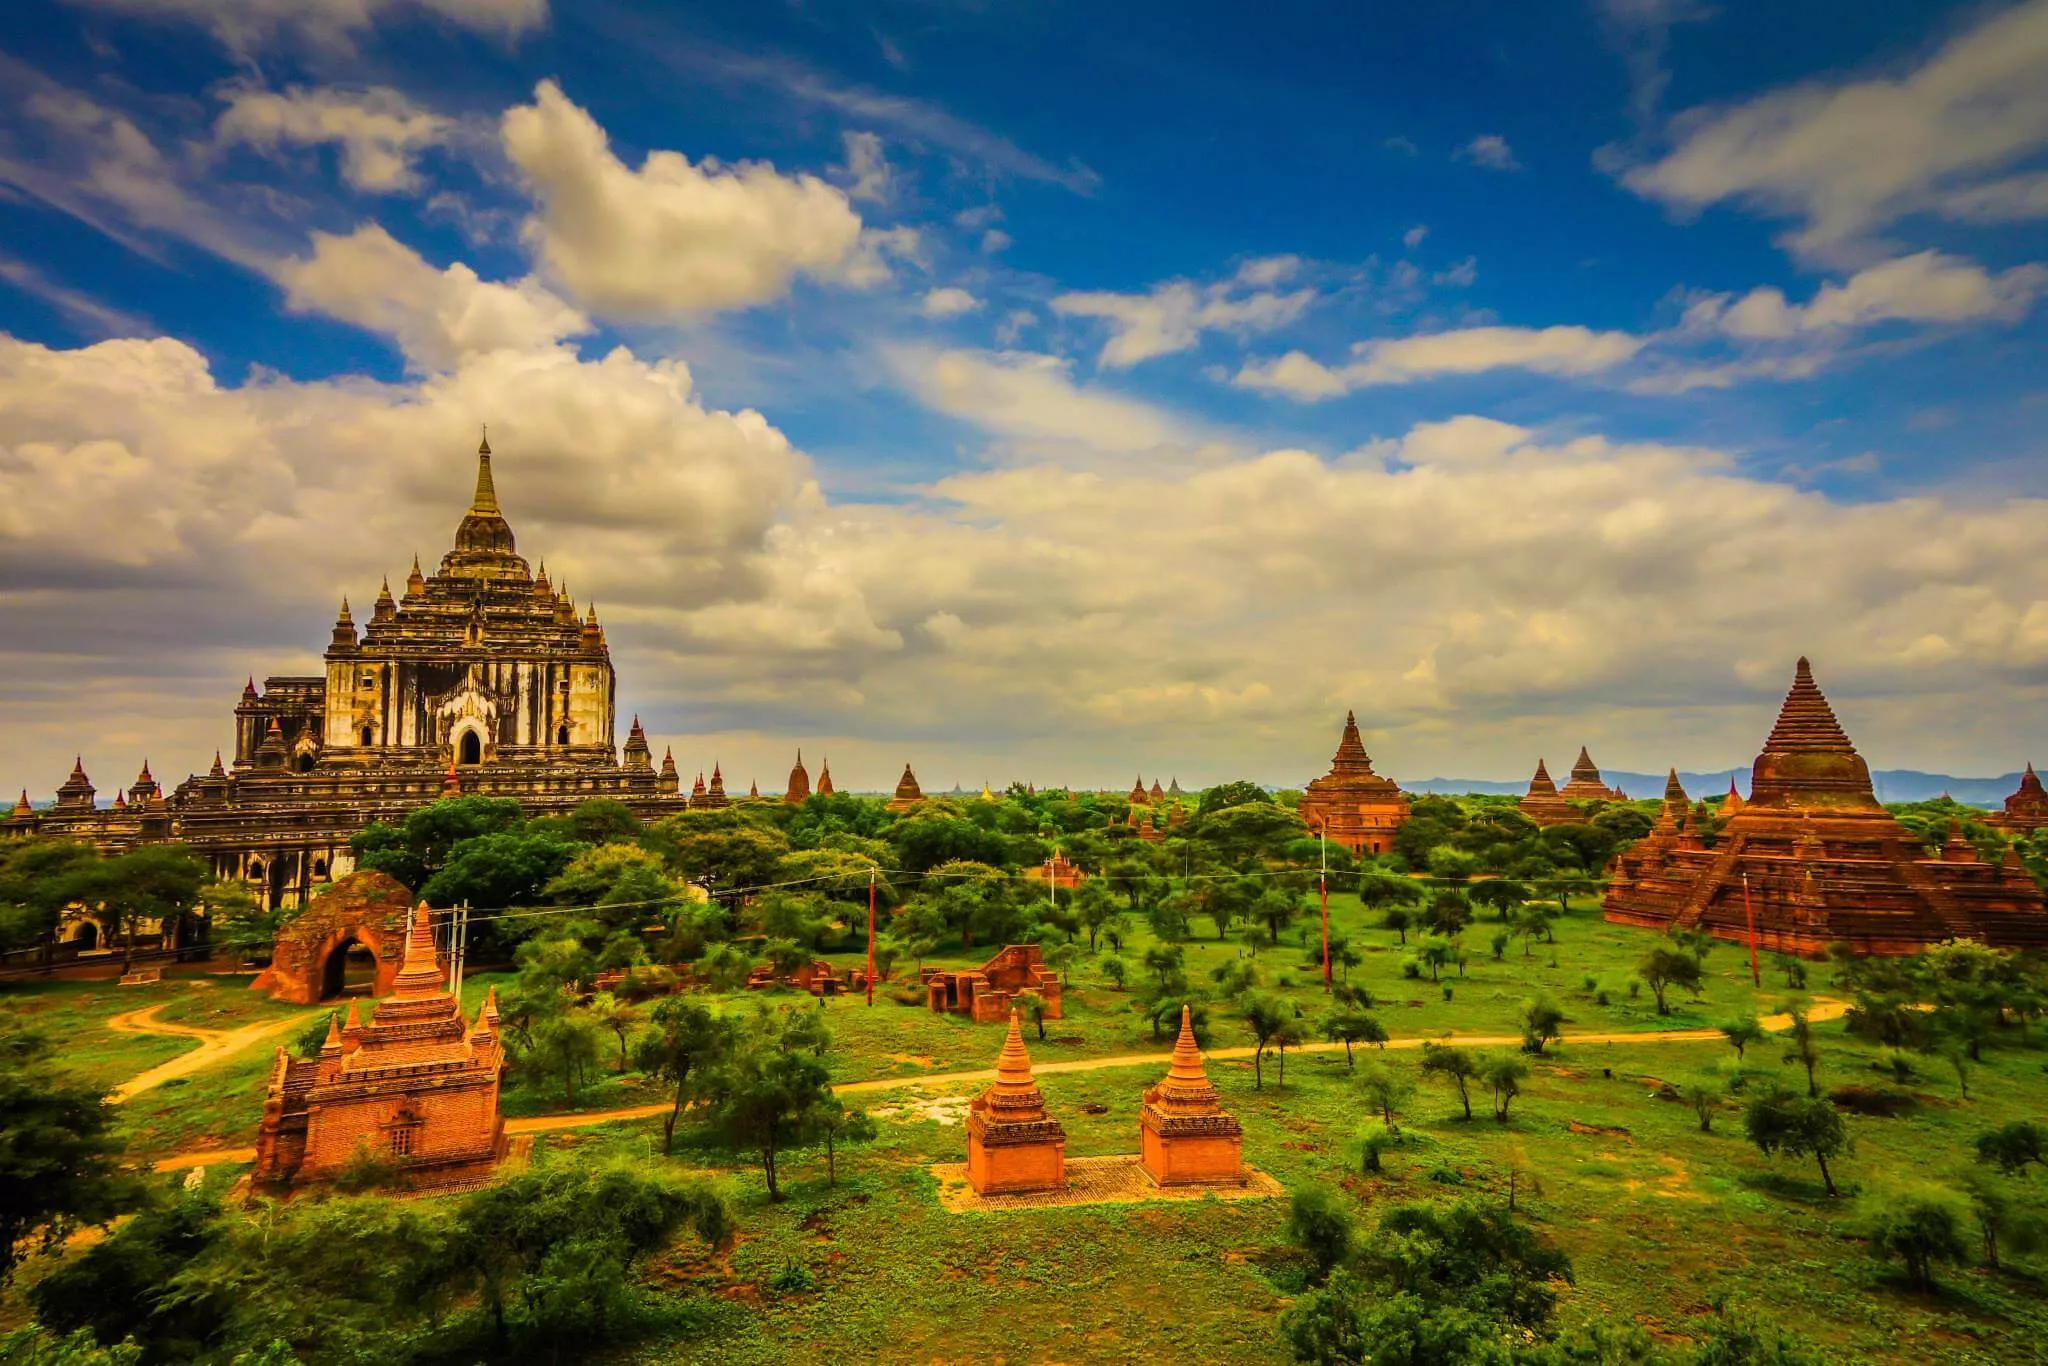 Temples of Bagan in Myanmar, Central Asia | Trekking & Hiking - Rated 3.2